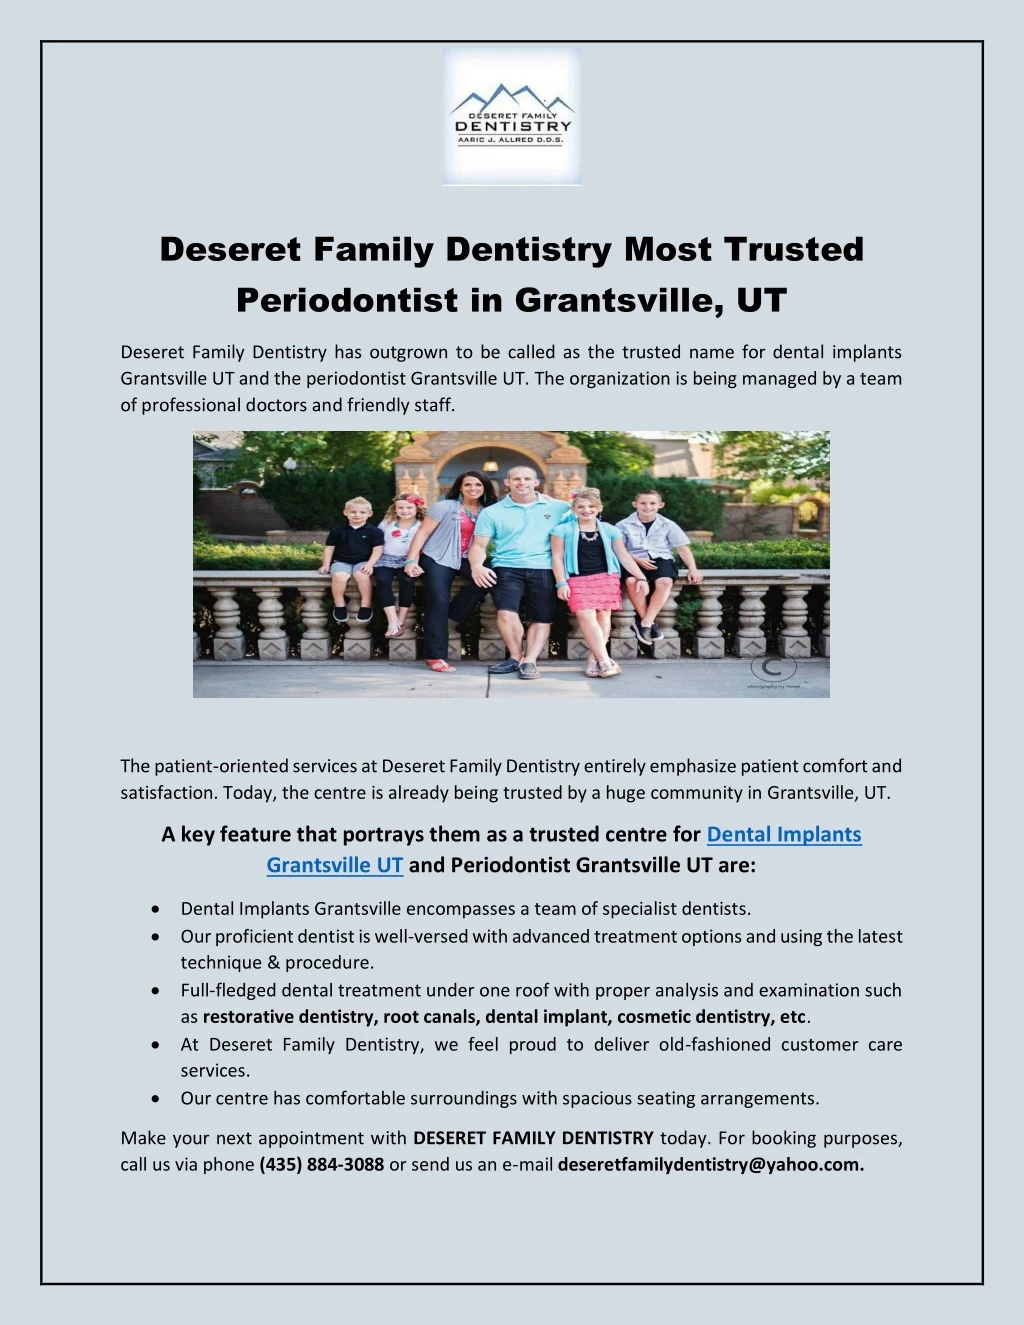 deseret family dentistry most trusted